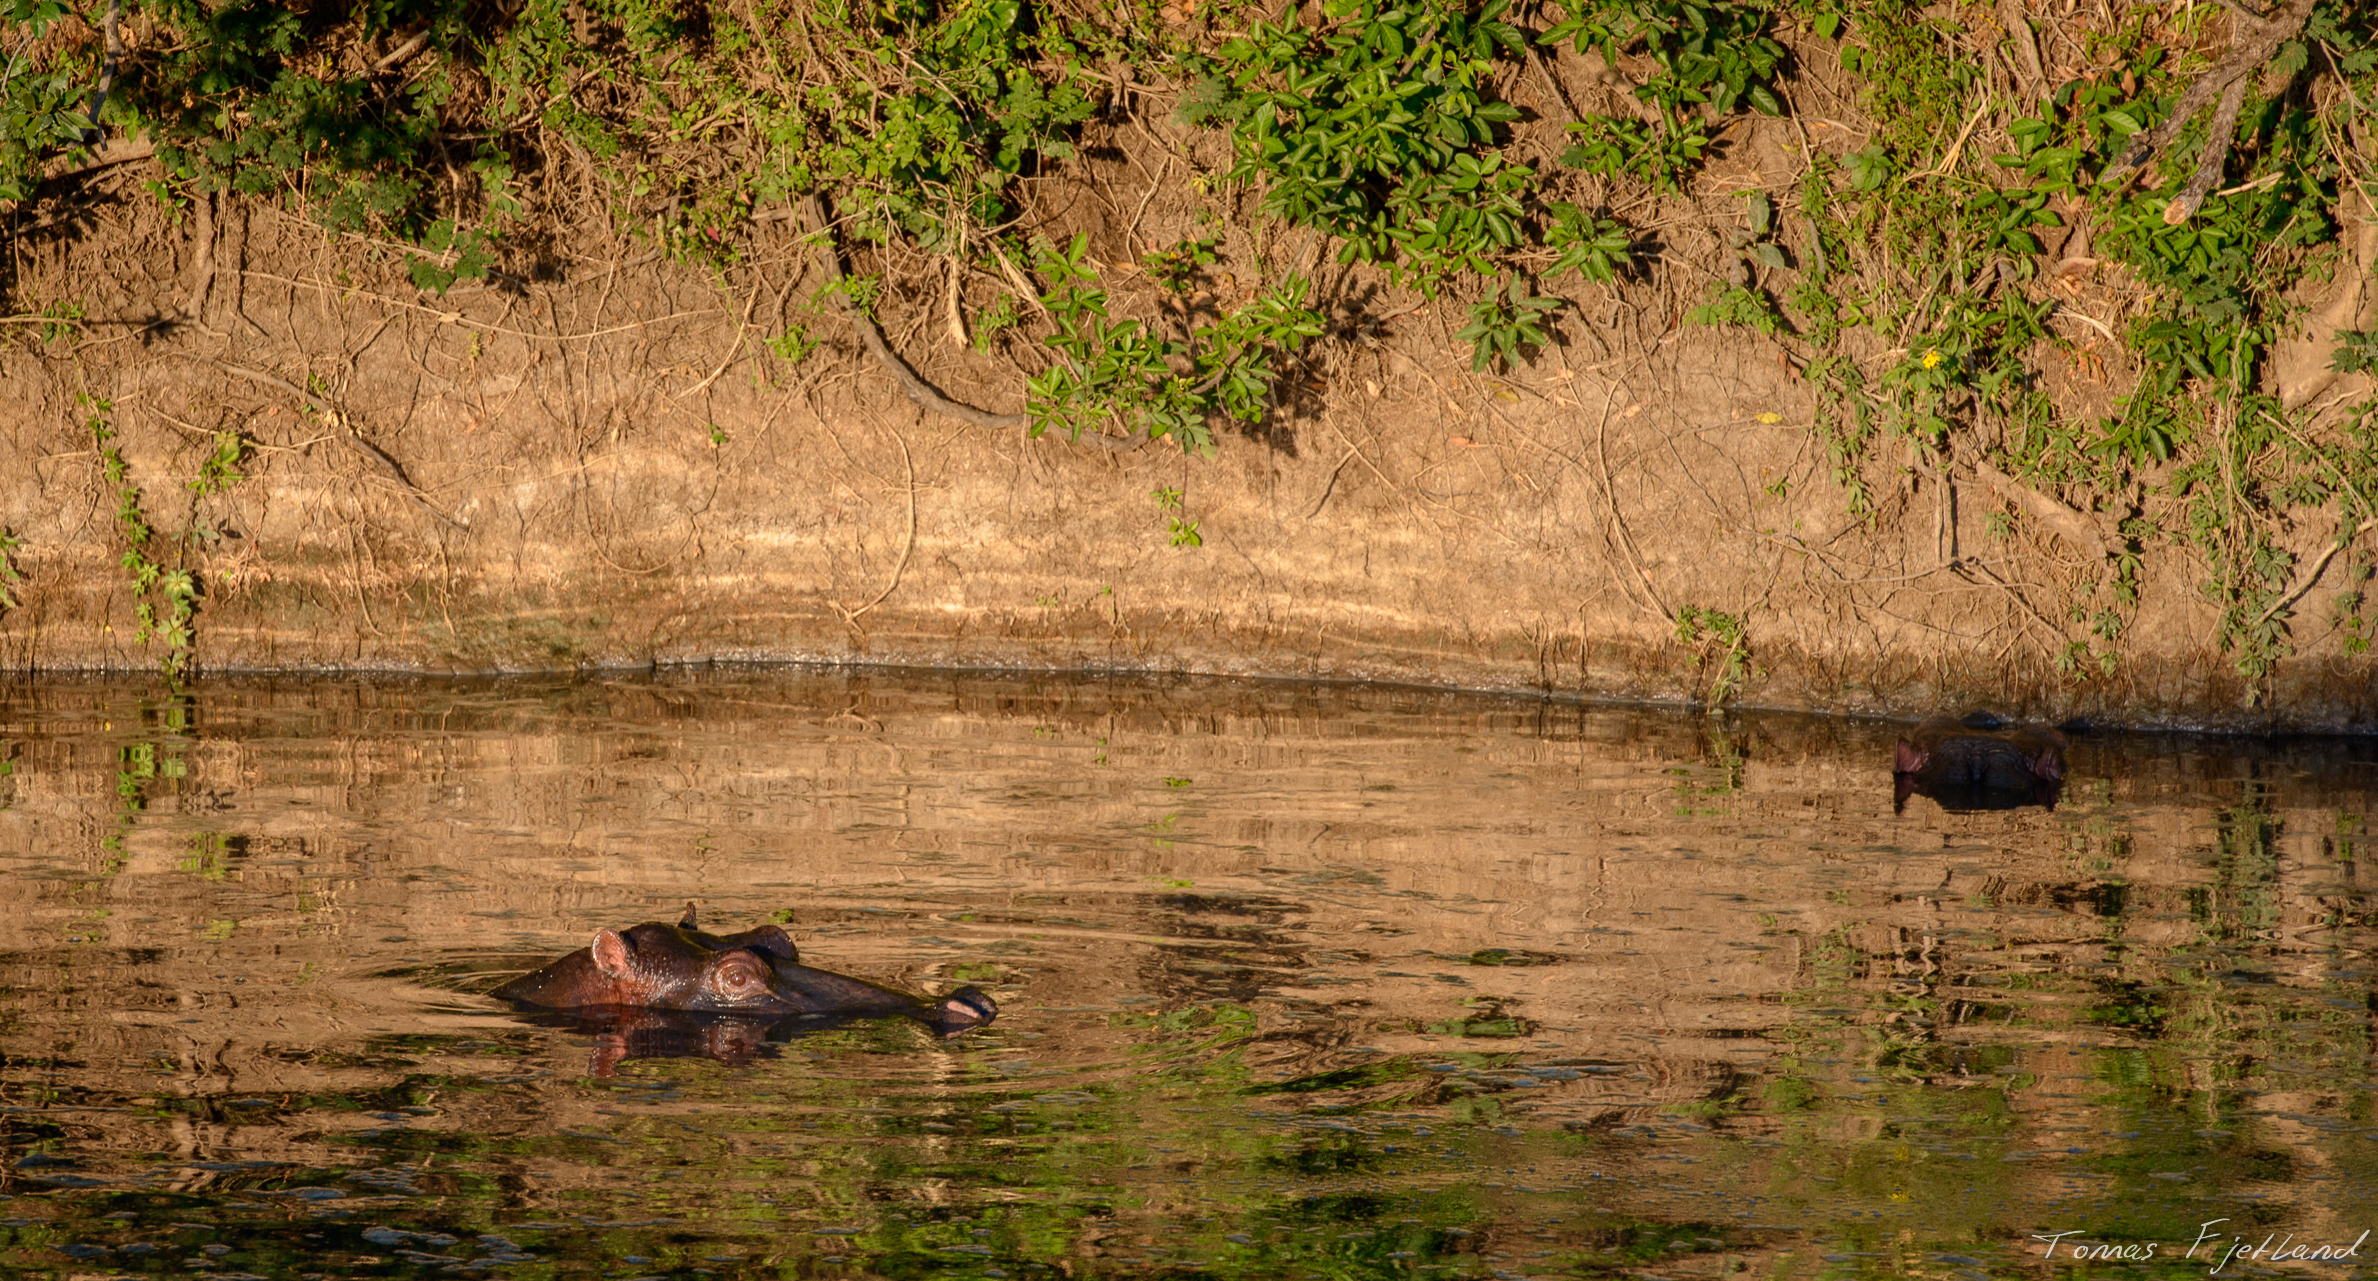 Hippos have returned to the hippo pools along the Ntiakitiak river for the day.